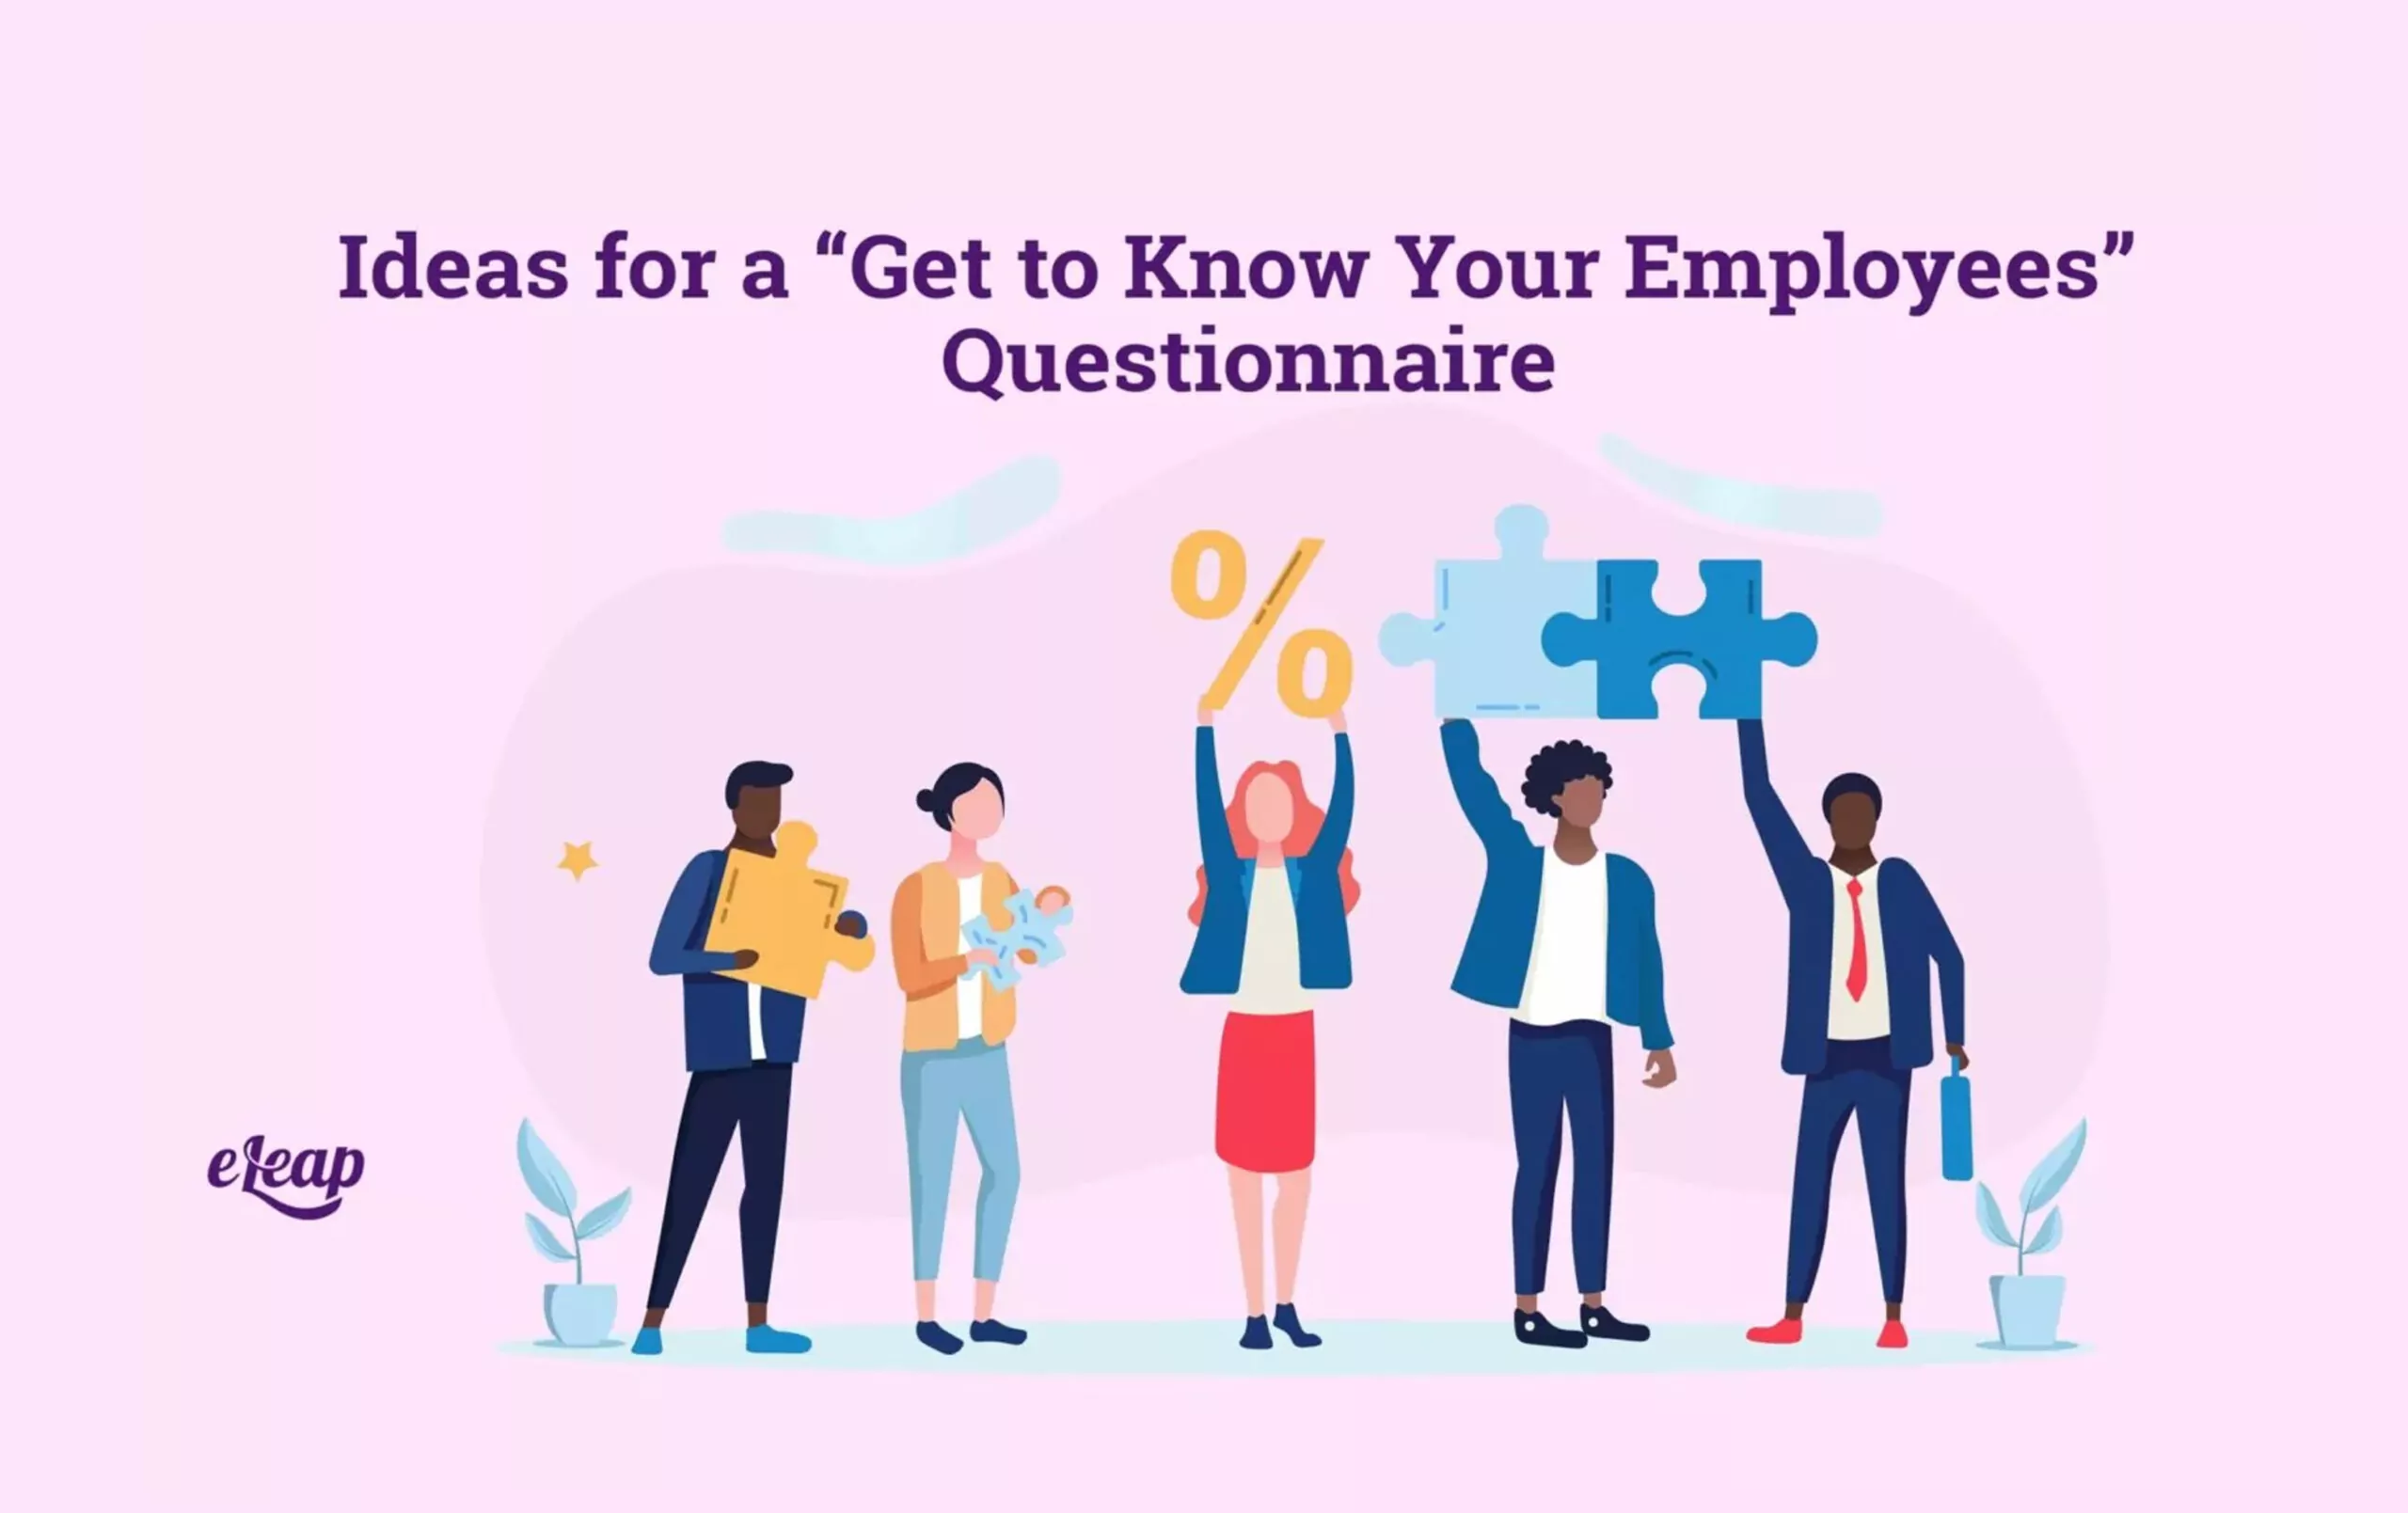 Ideas for a “Get to Know Your Employees” Questionnaire